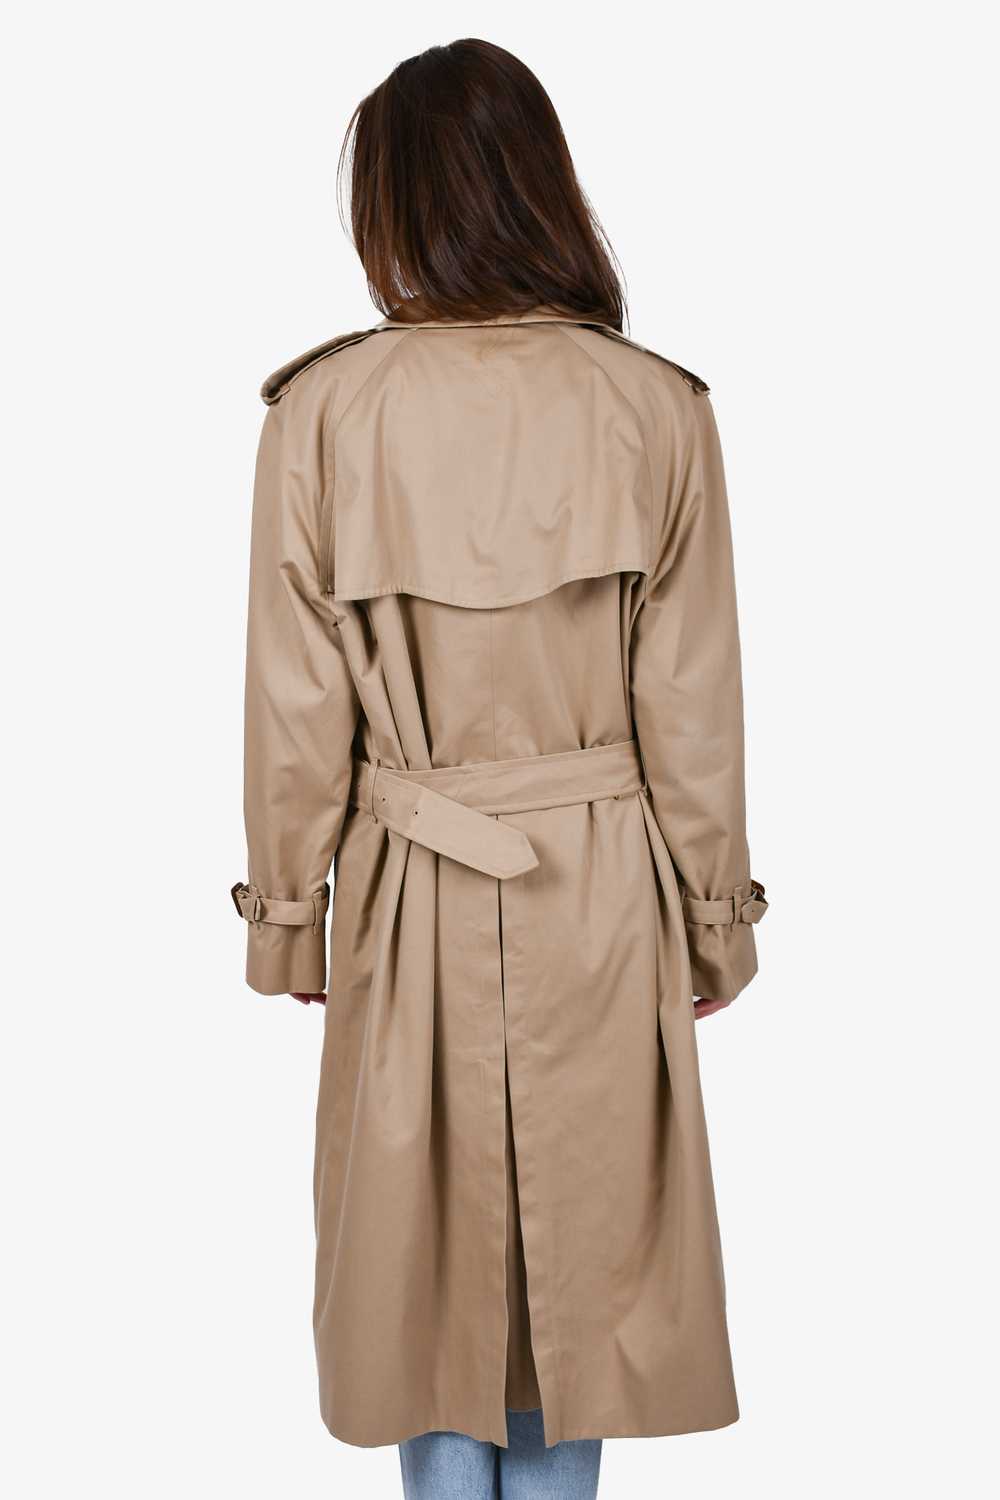 Burberrys Beige Wool Vintage Belted Trench Coat S… - image 3